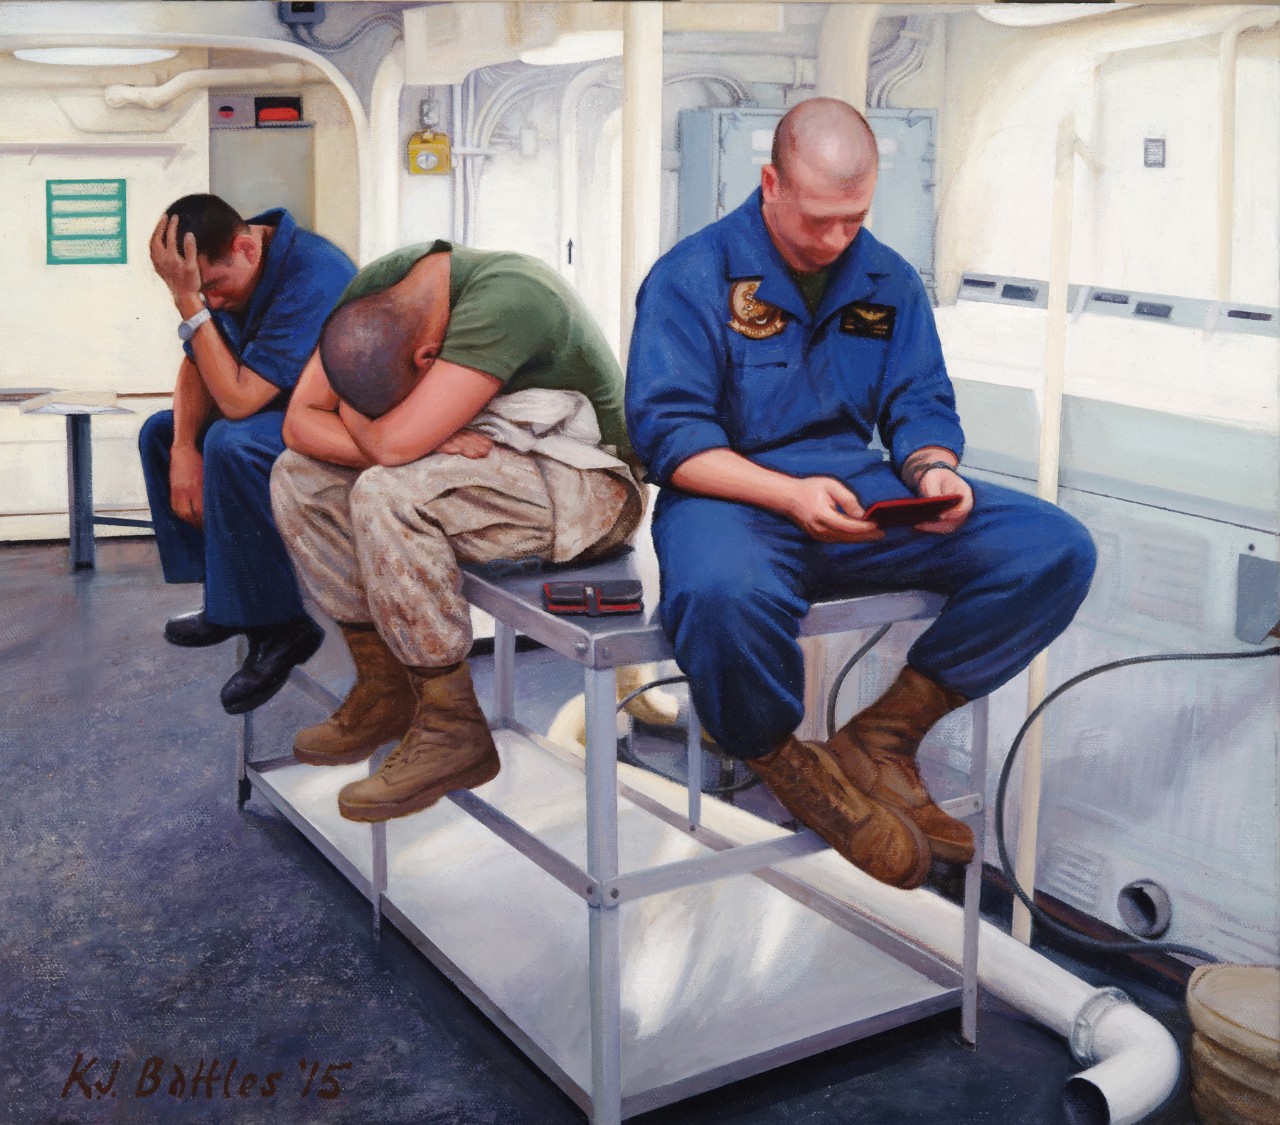 Three crewmen sit on a table in the laundry room looking bored